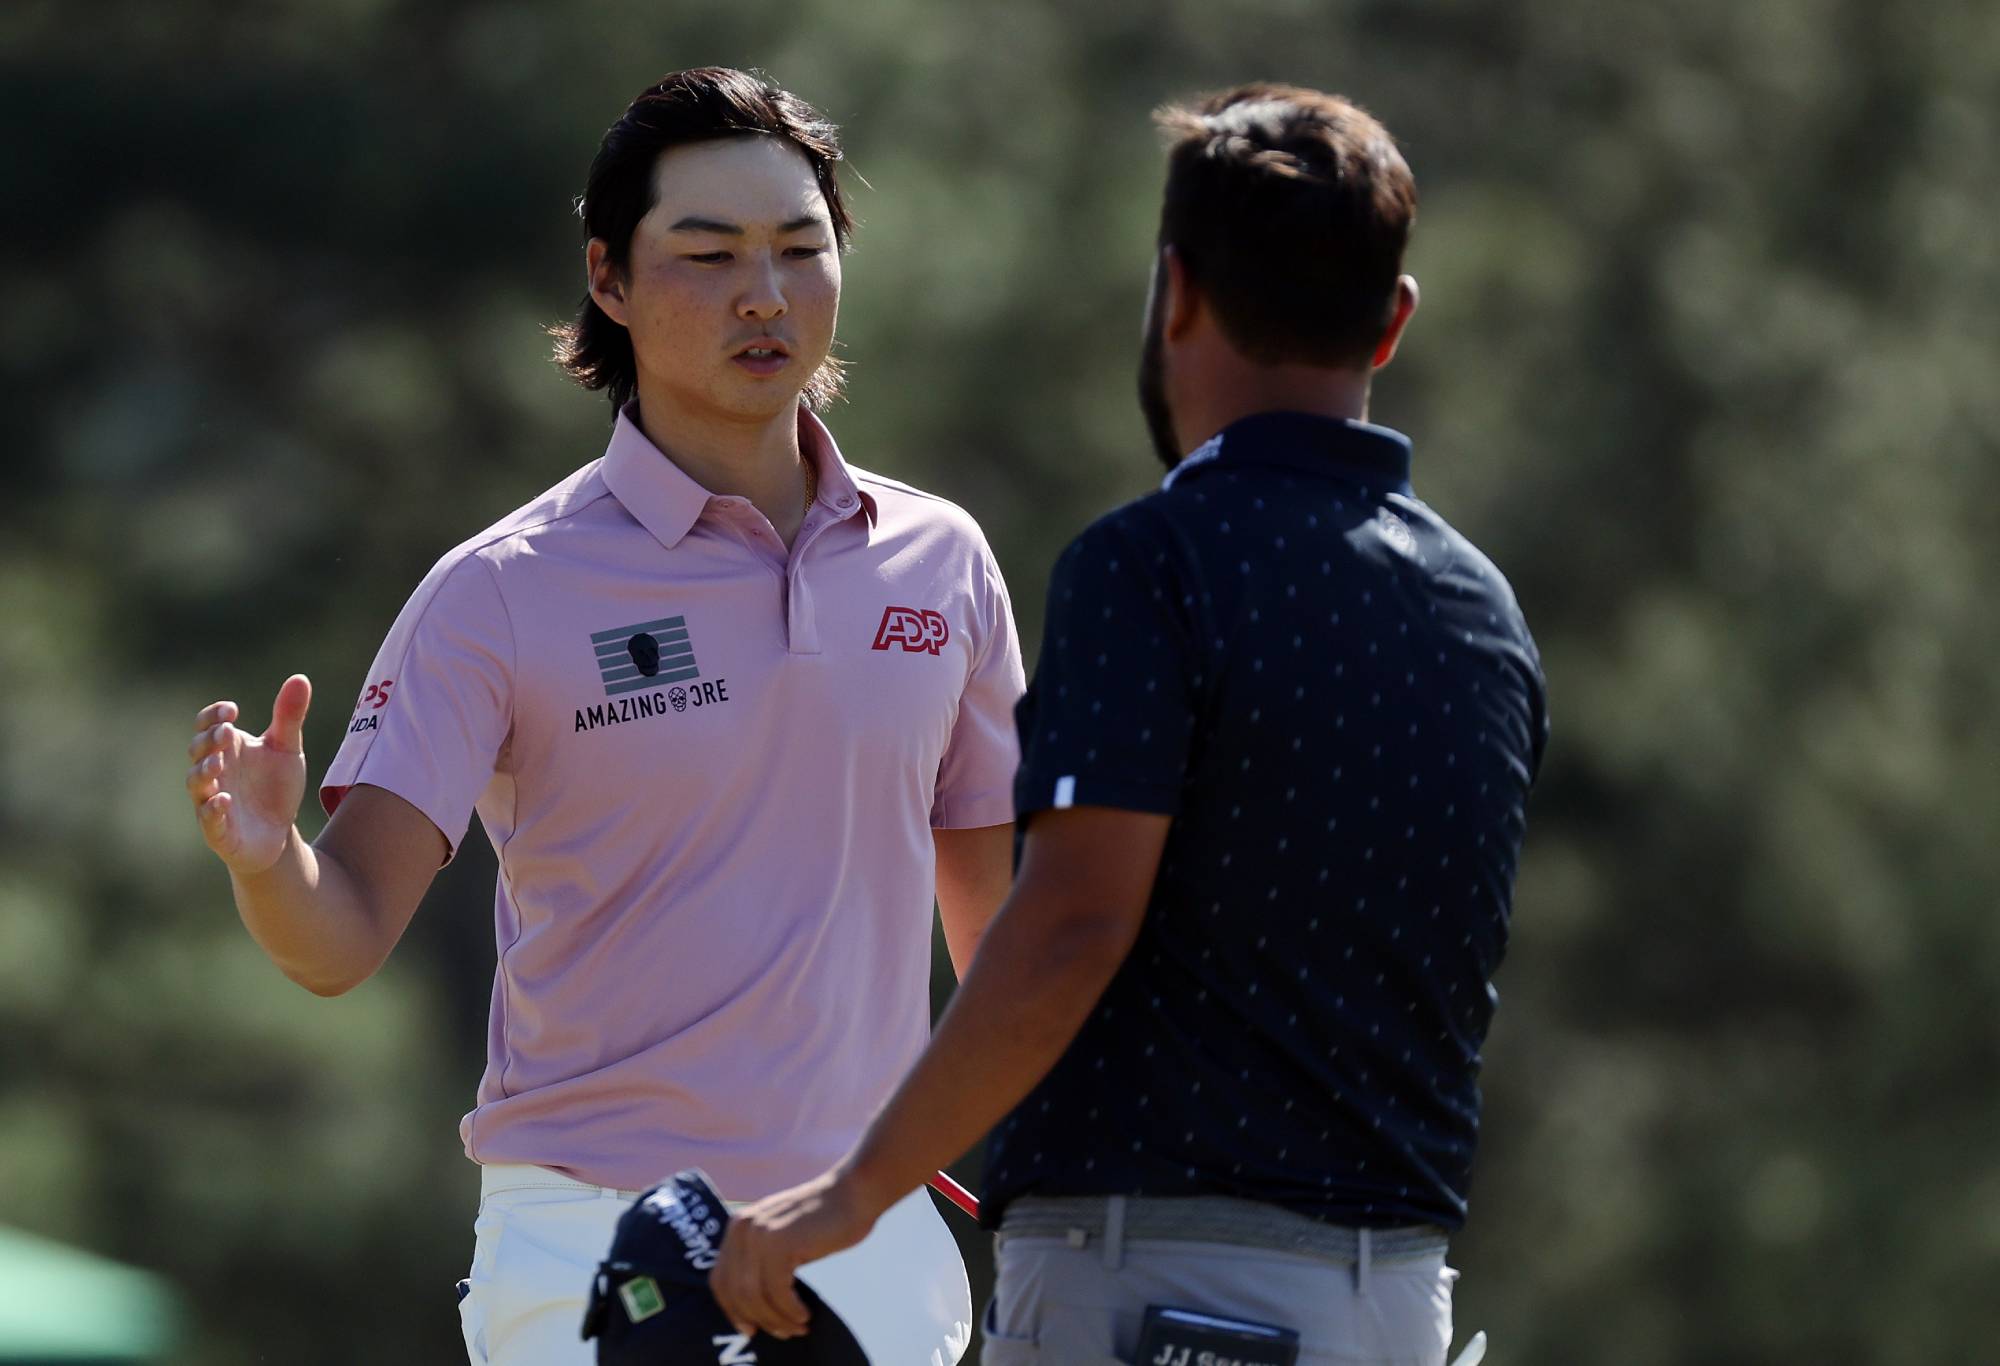 Min Woo Lee of Australia (L) and J.J. Spaun shake hands on the 18th green after finishing their round during the final round of the Masters at Augusta National Golf Club on April 10, 2022 in Augusta, Georgia. (Photo by Gregory Shamus/Getty Images)